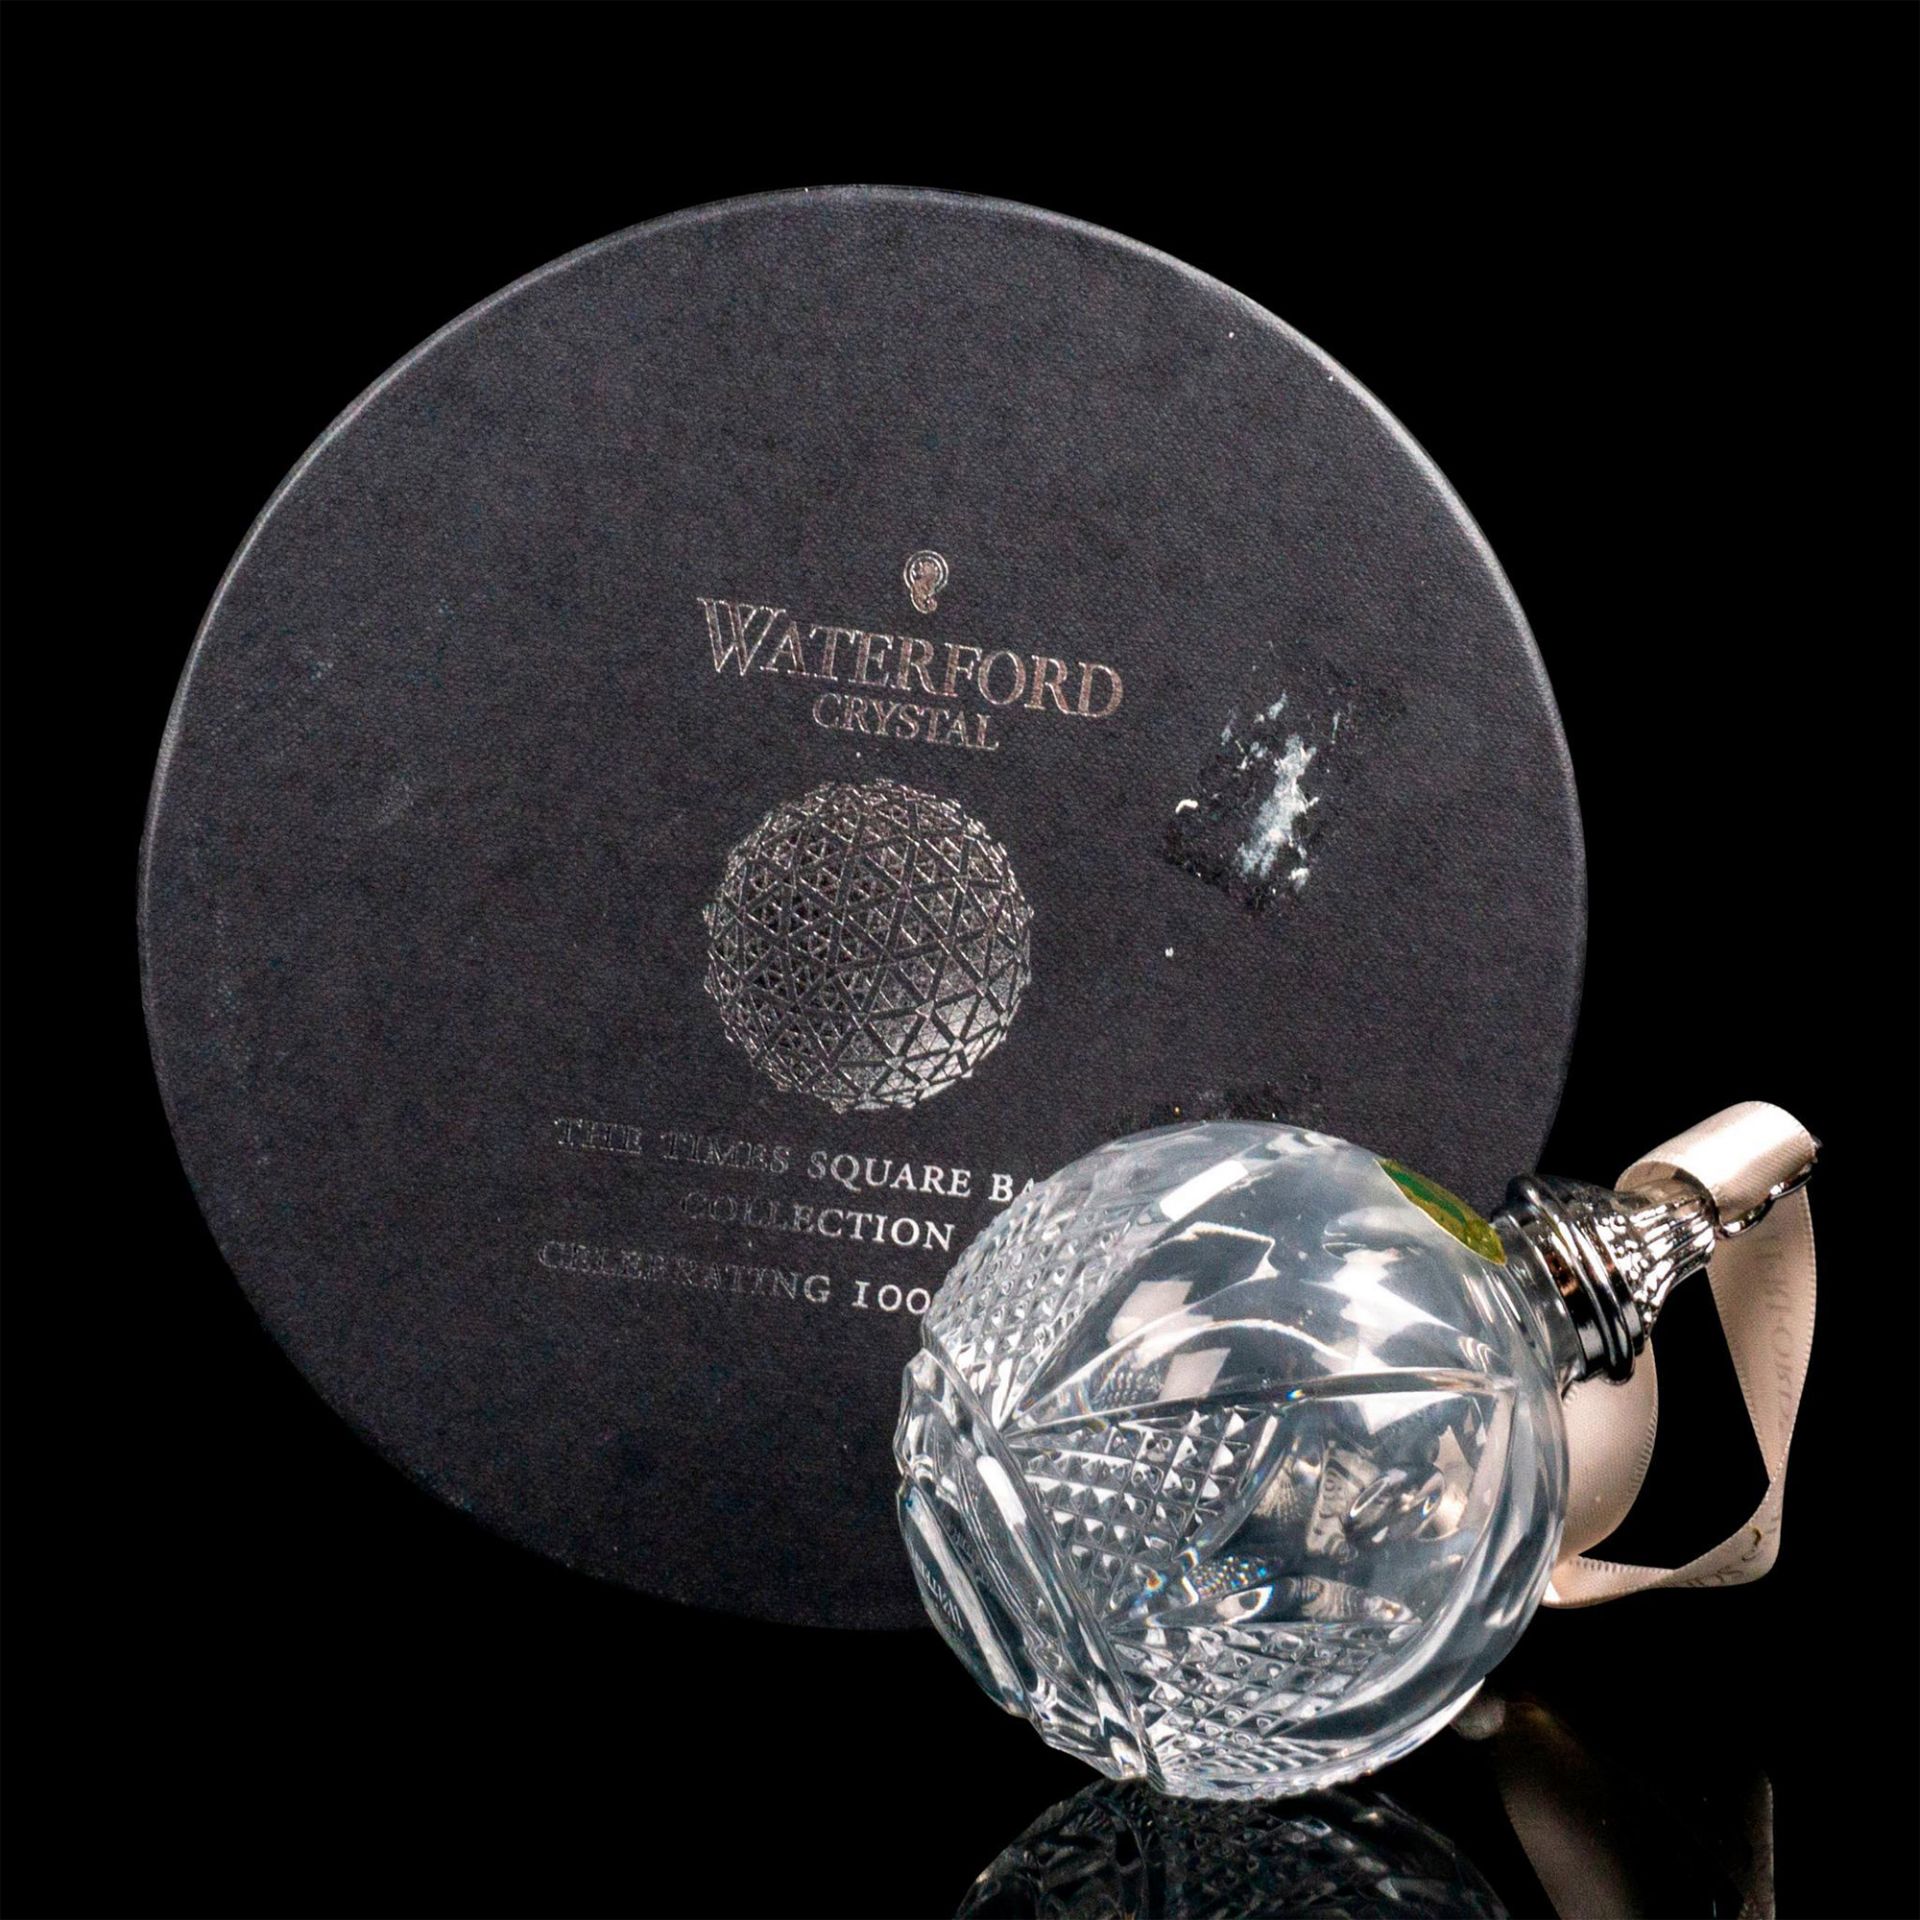 Waterford Crystal The Times Square Ball, Friendship Ornament - Image 3 of 3